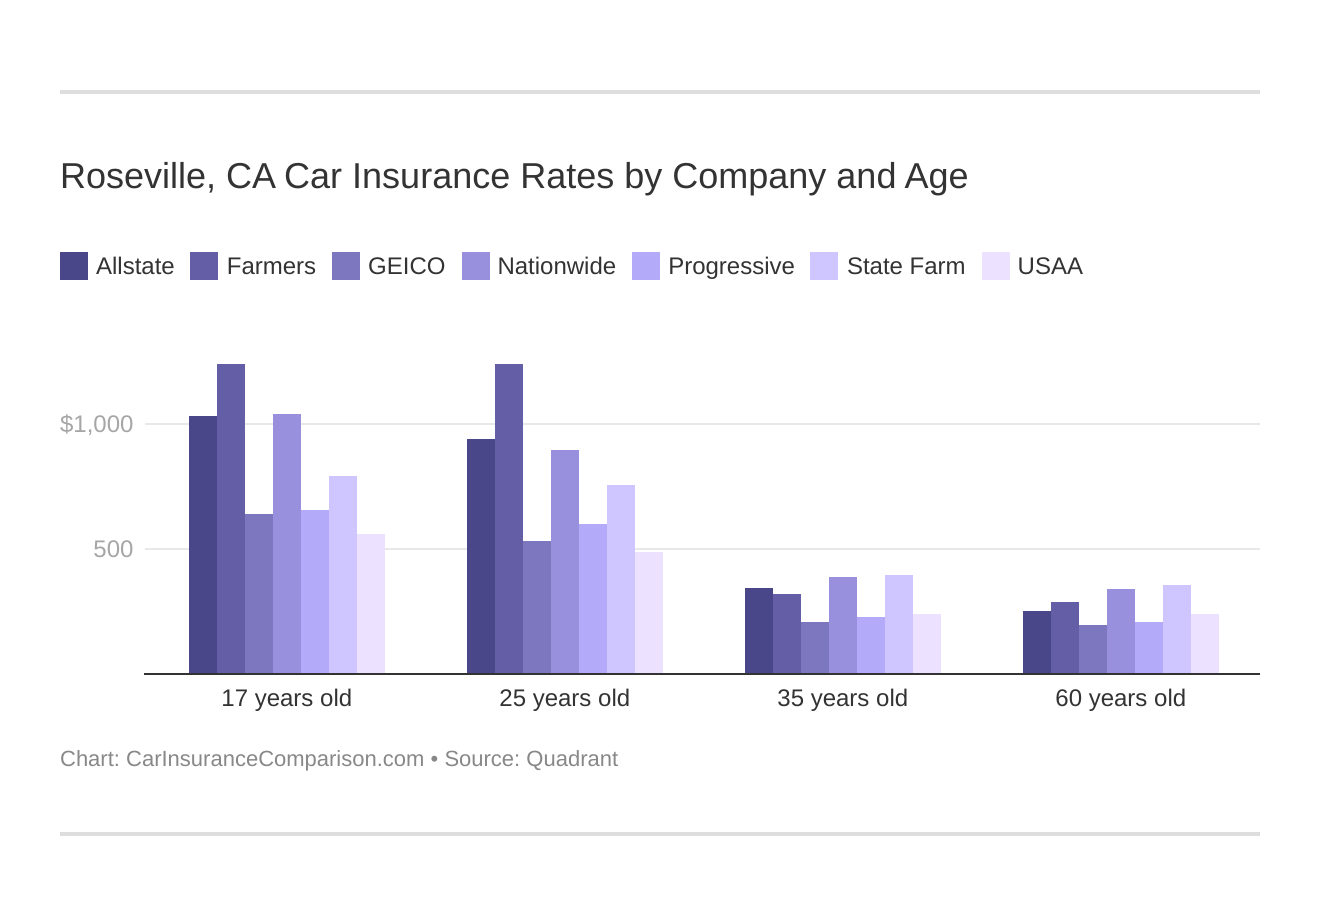 Roseville, CA Car Insurance Rates by Company and Age